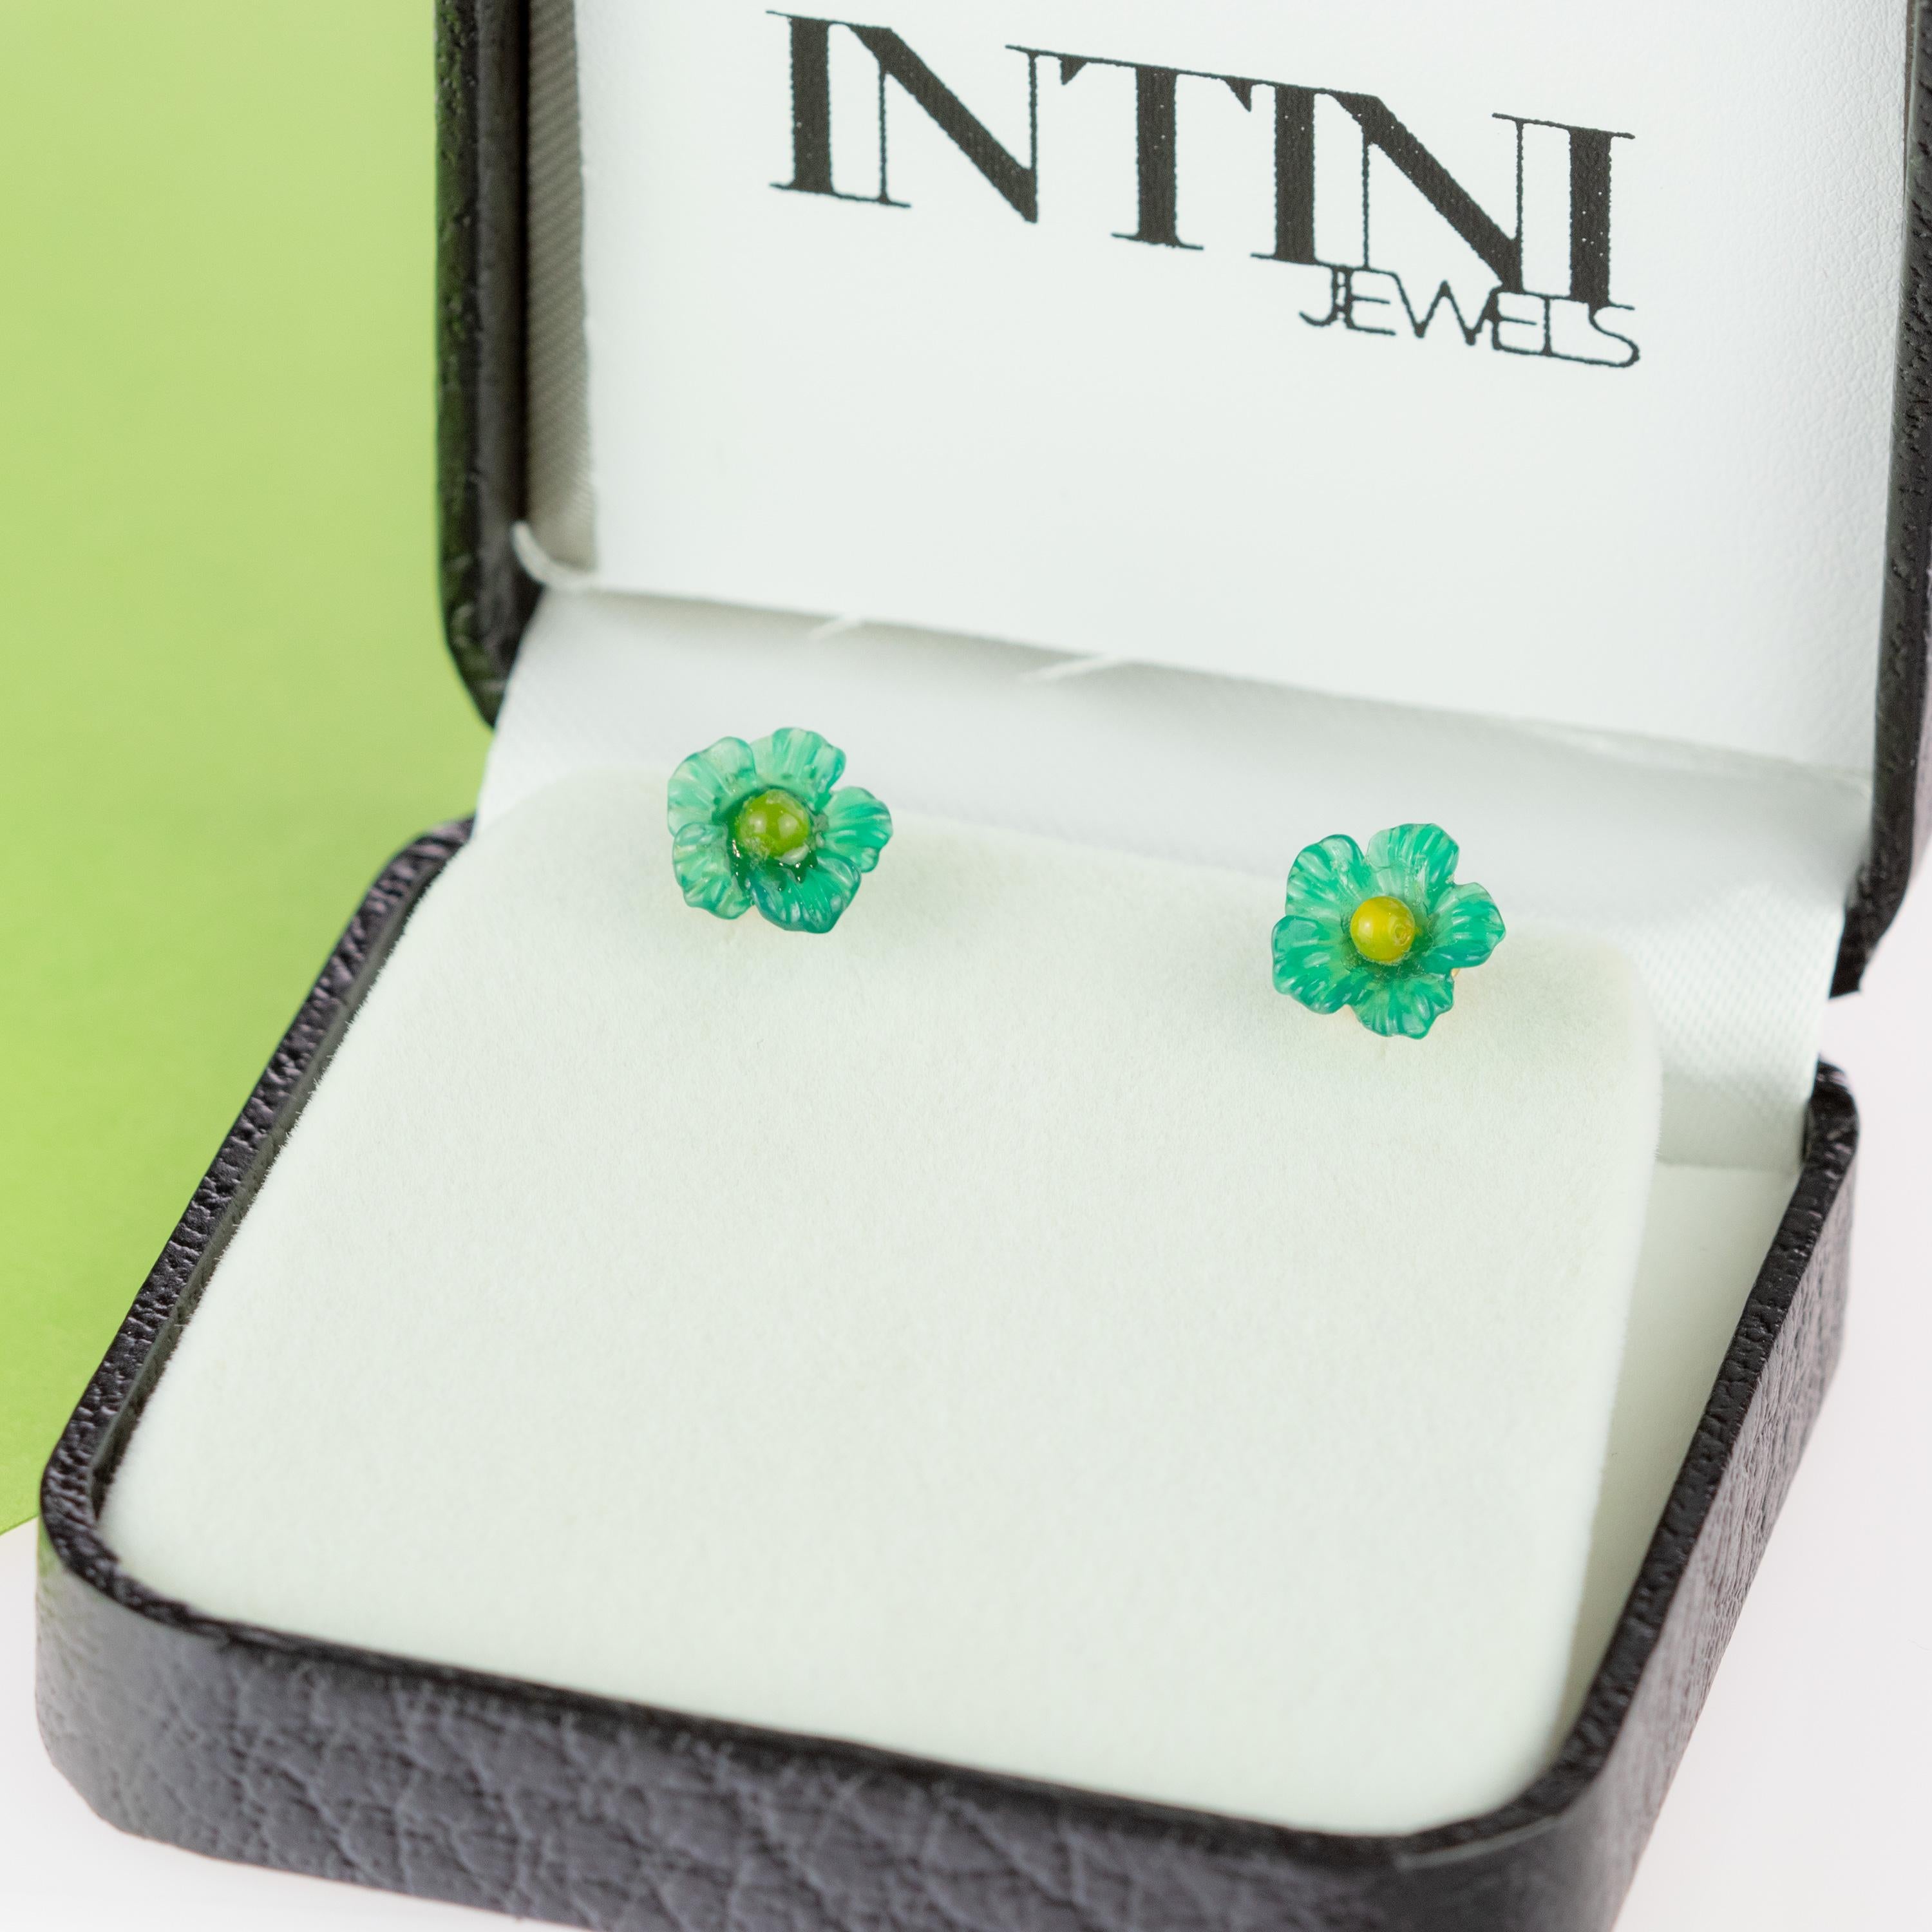 Astonishing and delicate green and yellow 2.5 carat agate flower stud earrings. Carved petals that evoke the italian handmade traditional jewelry work wrapping itself in a soft look enriched with 14 karat gold manifesting glamour and exquisite